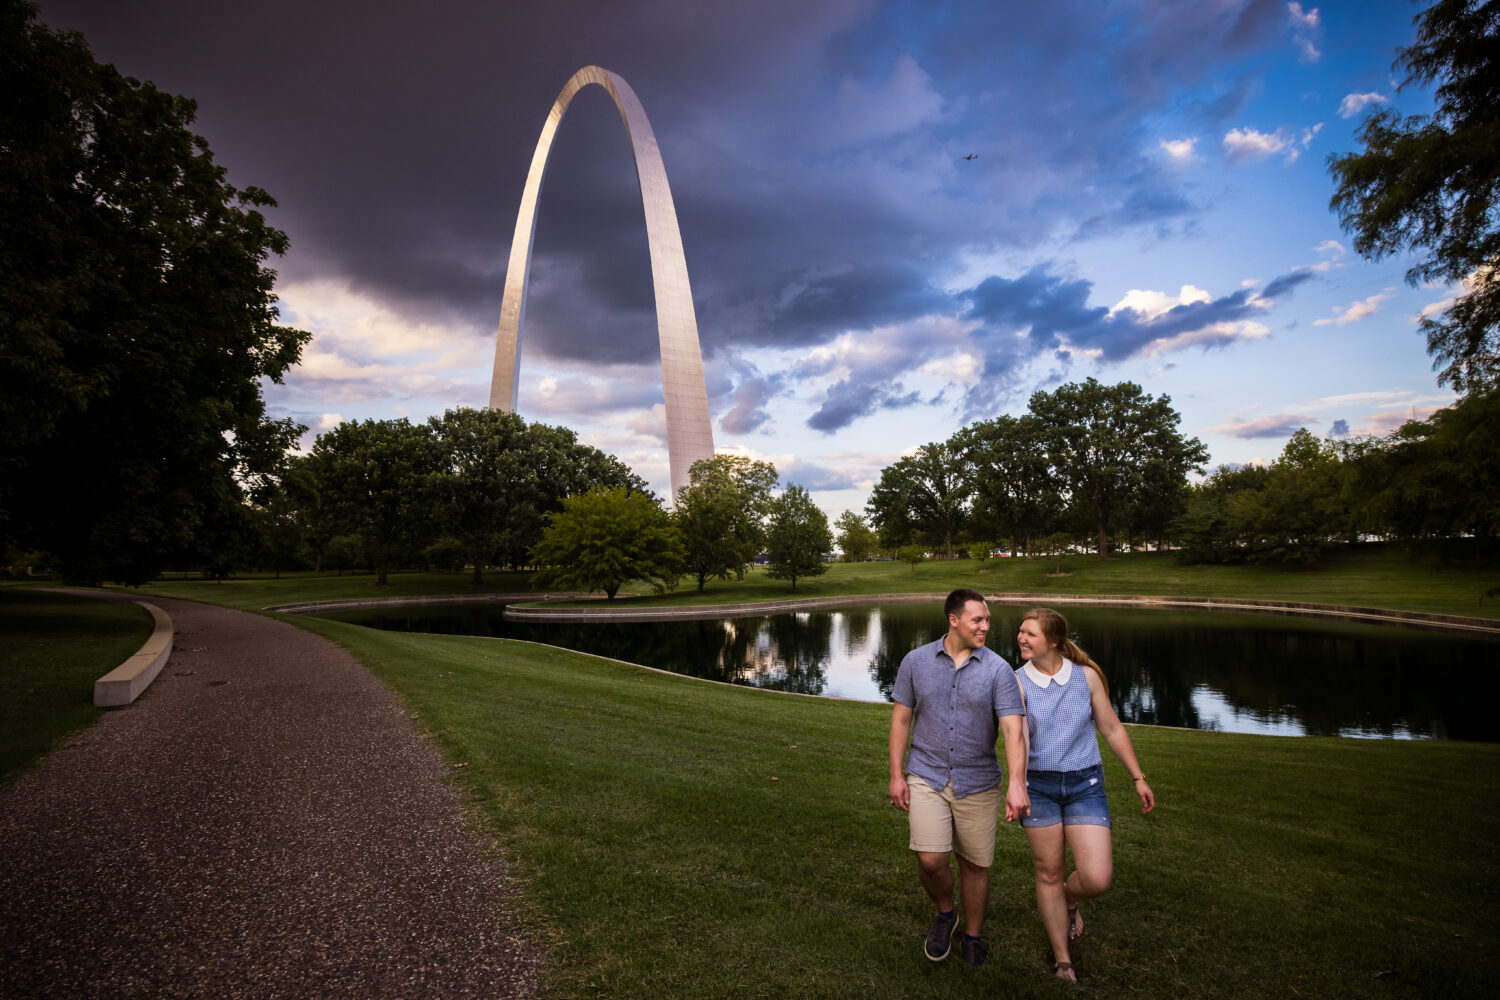 Creative Proposal Photographer, rhinehart photography, captures this unique perspective of the couple holding hands, smiling at one another with the archway in the background behind them as a storm gets ready to roll in 